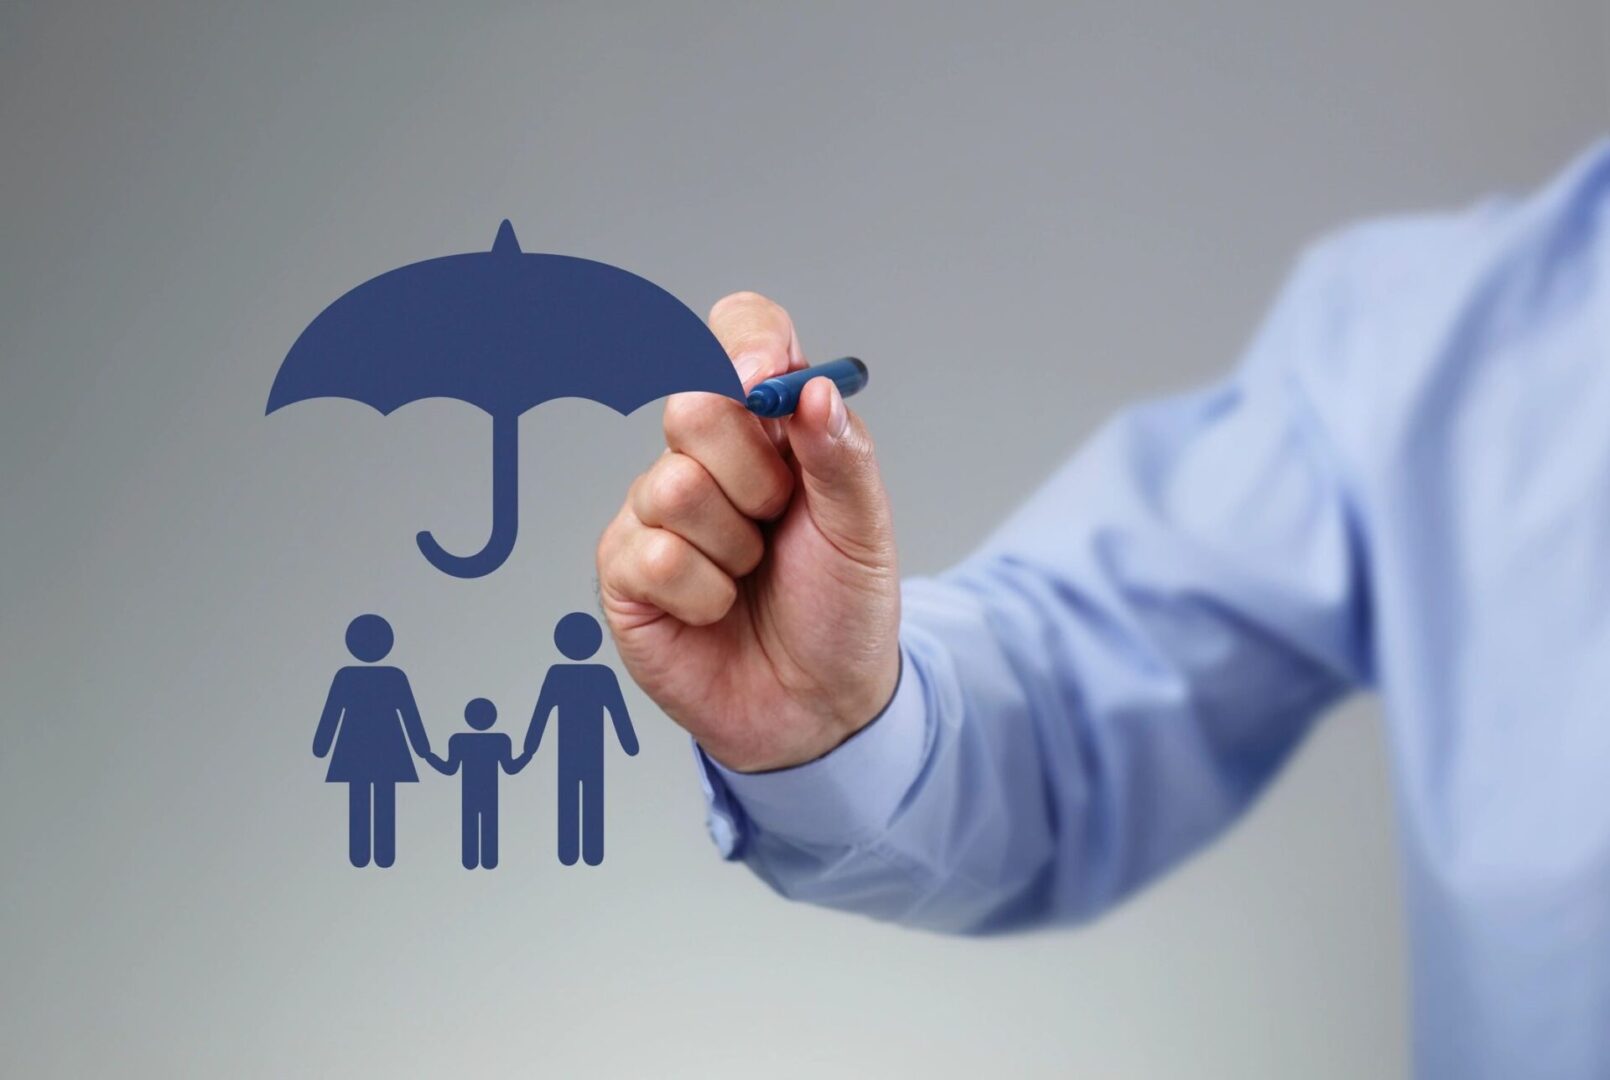 Family Insurance Protection